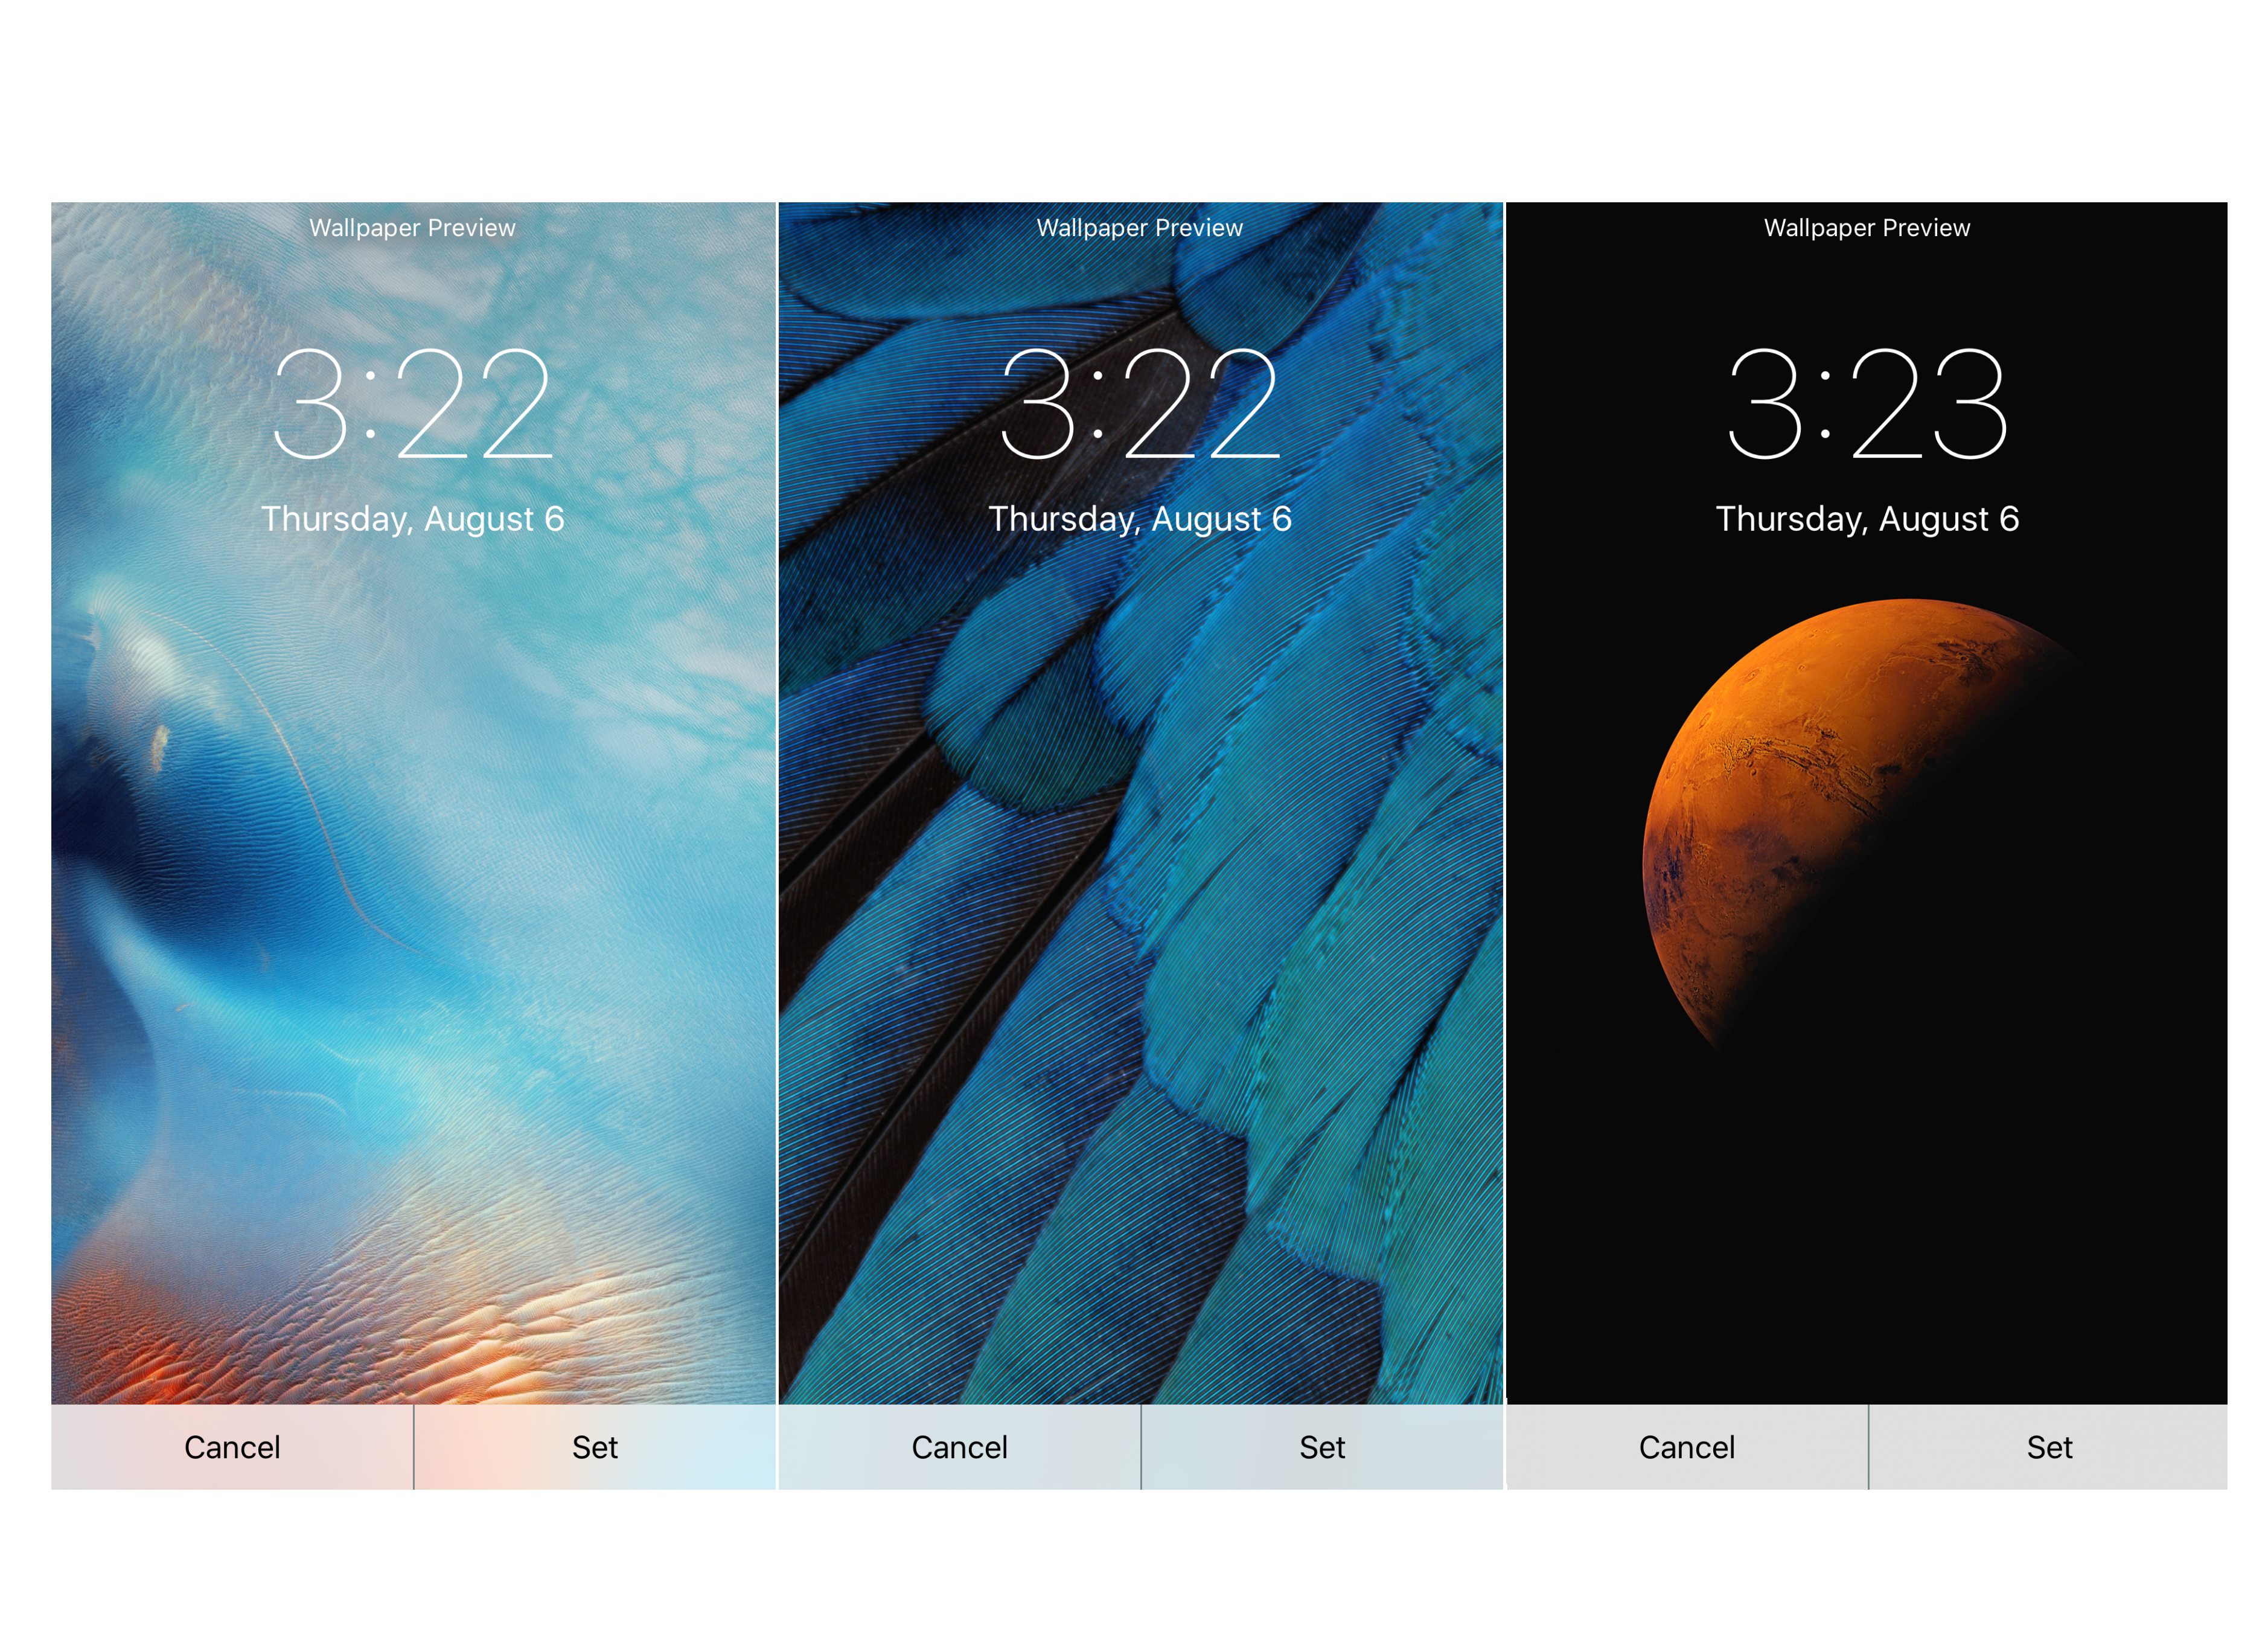 How to Get the iOS 9 Wallpaper Right Now